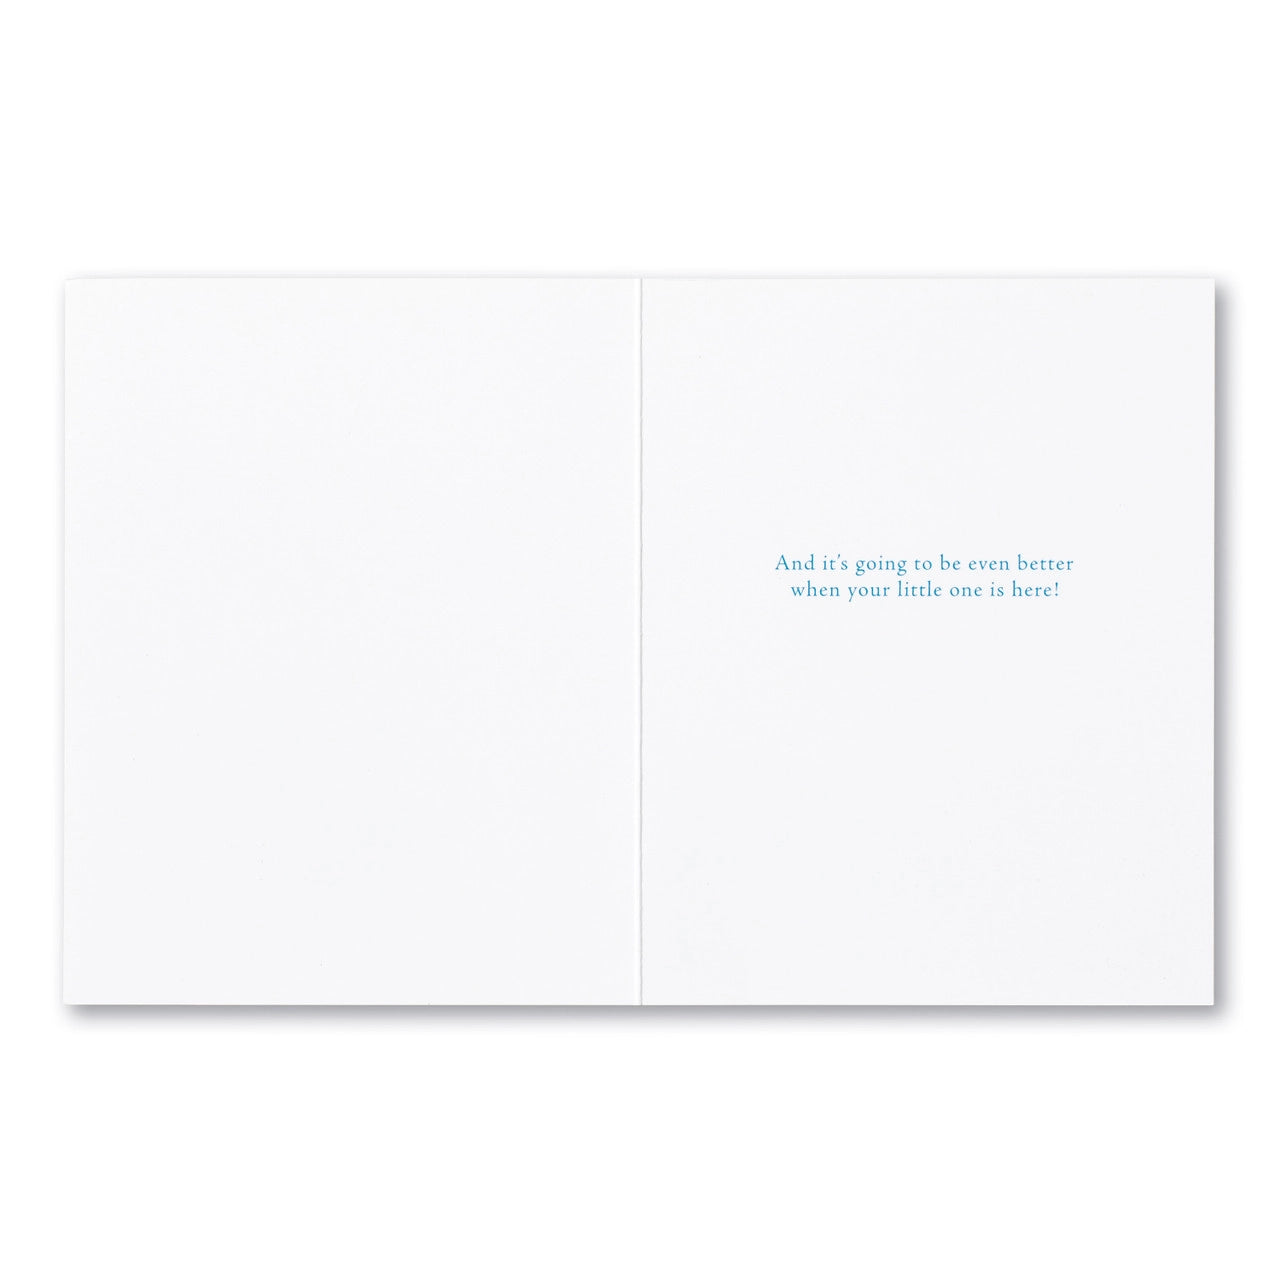 Positively Green Baby Shower Greeting Card - “LIFE IS A BEAUTIFUL, MAGNIFICENT THING... ” —CHARLIE CHAPLIN - Mellow Monkey